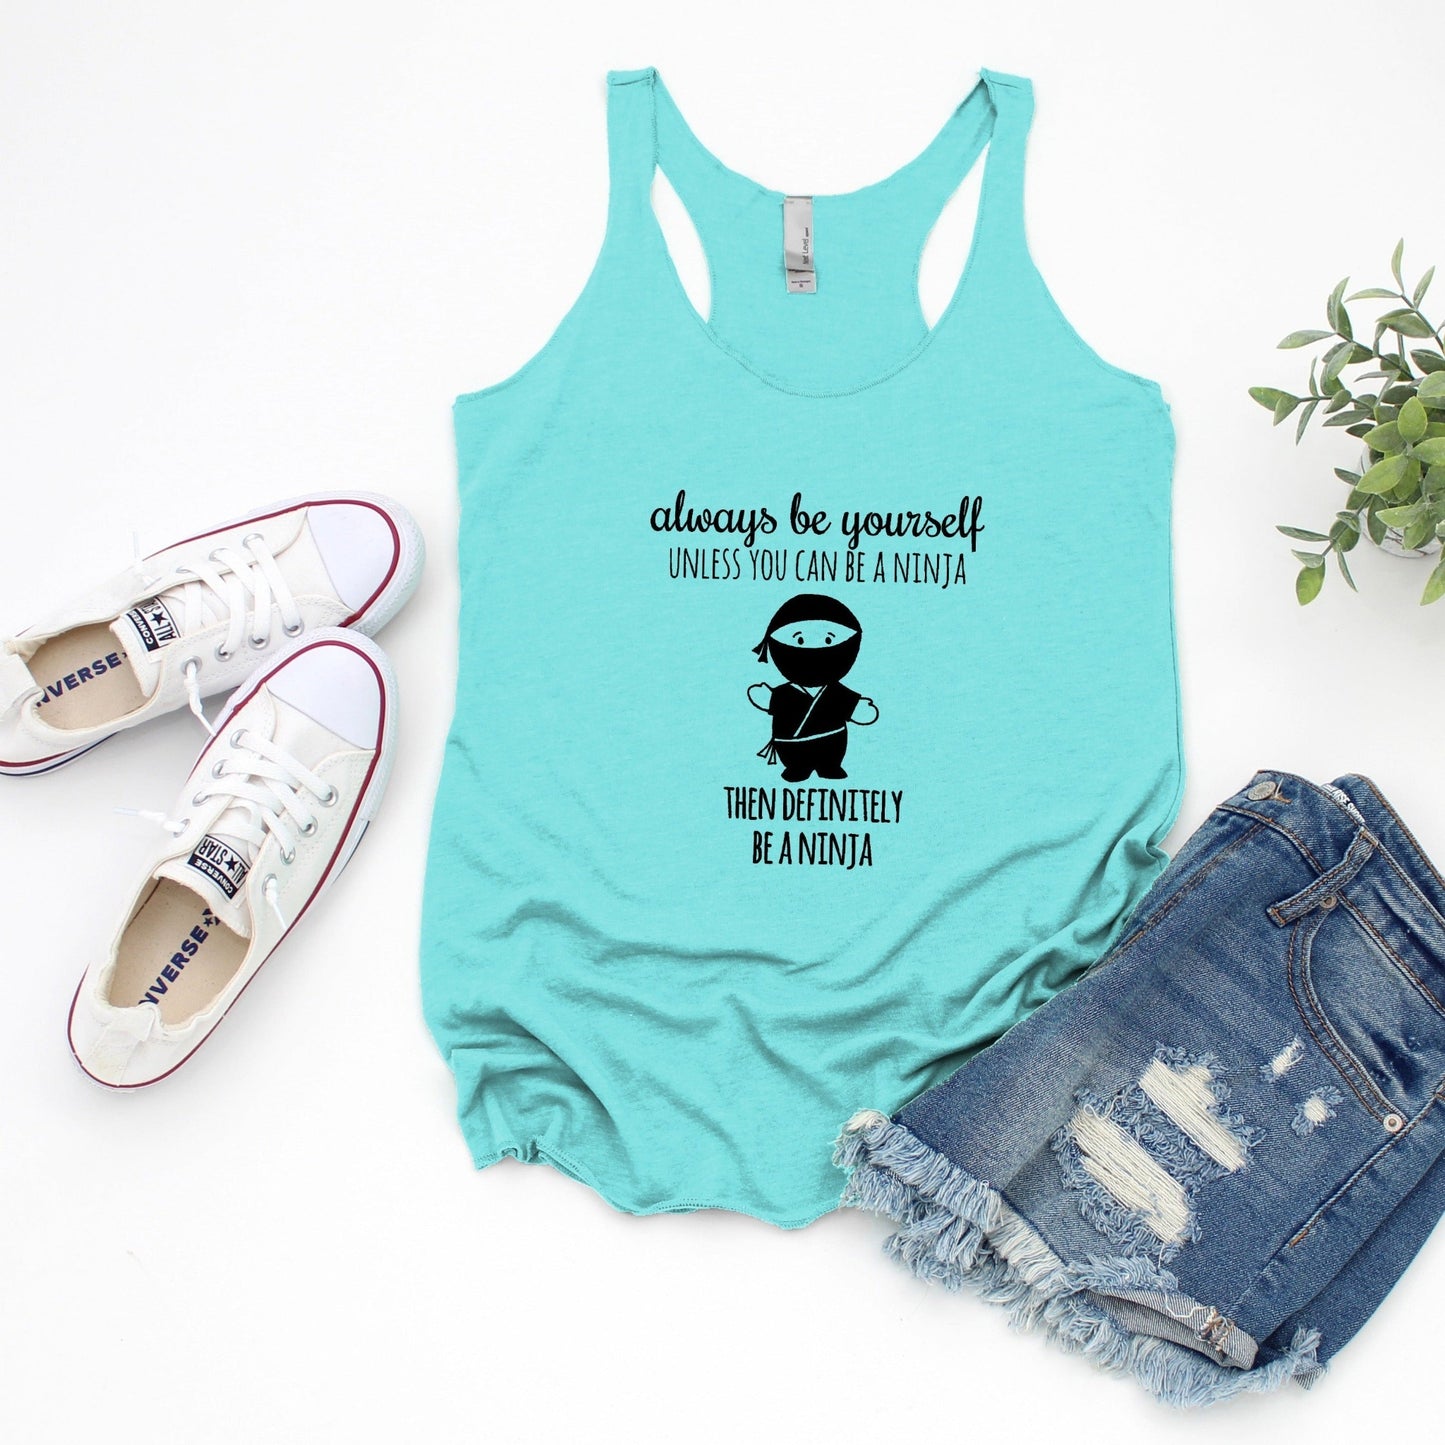 Always Be Yourself Unless You Can Be A Ninja, Then Definitely Be A Ninja - Women's Tank - Heather Gray, Tahiti, or Envy